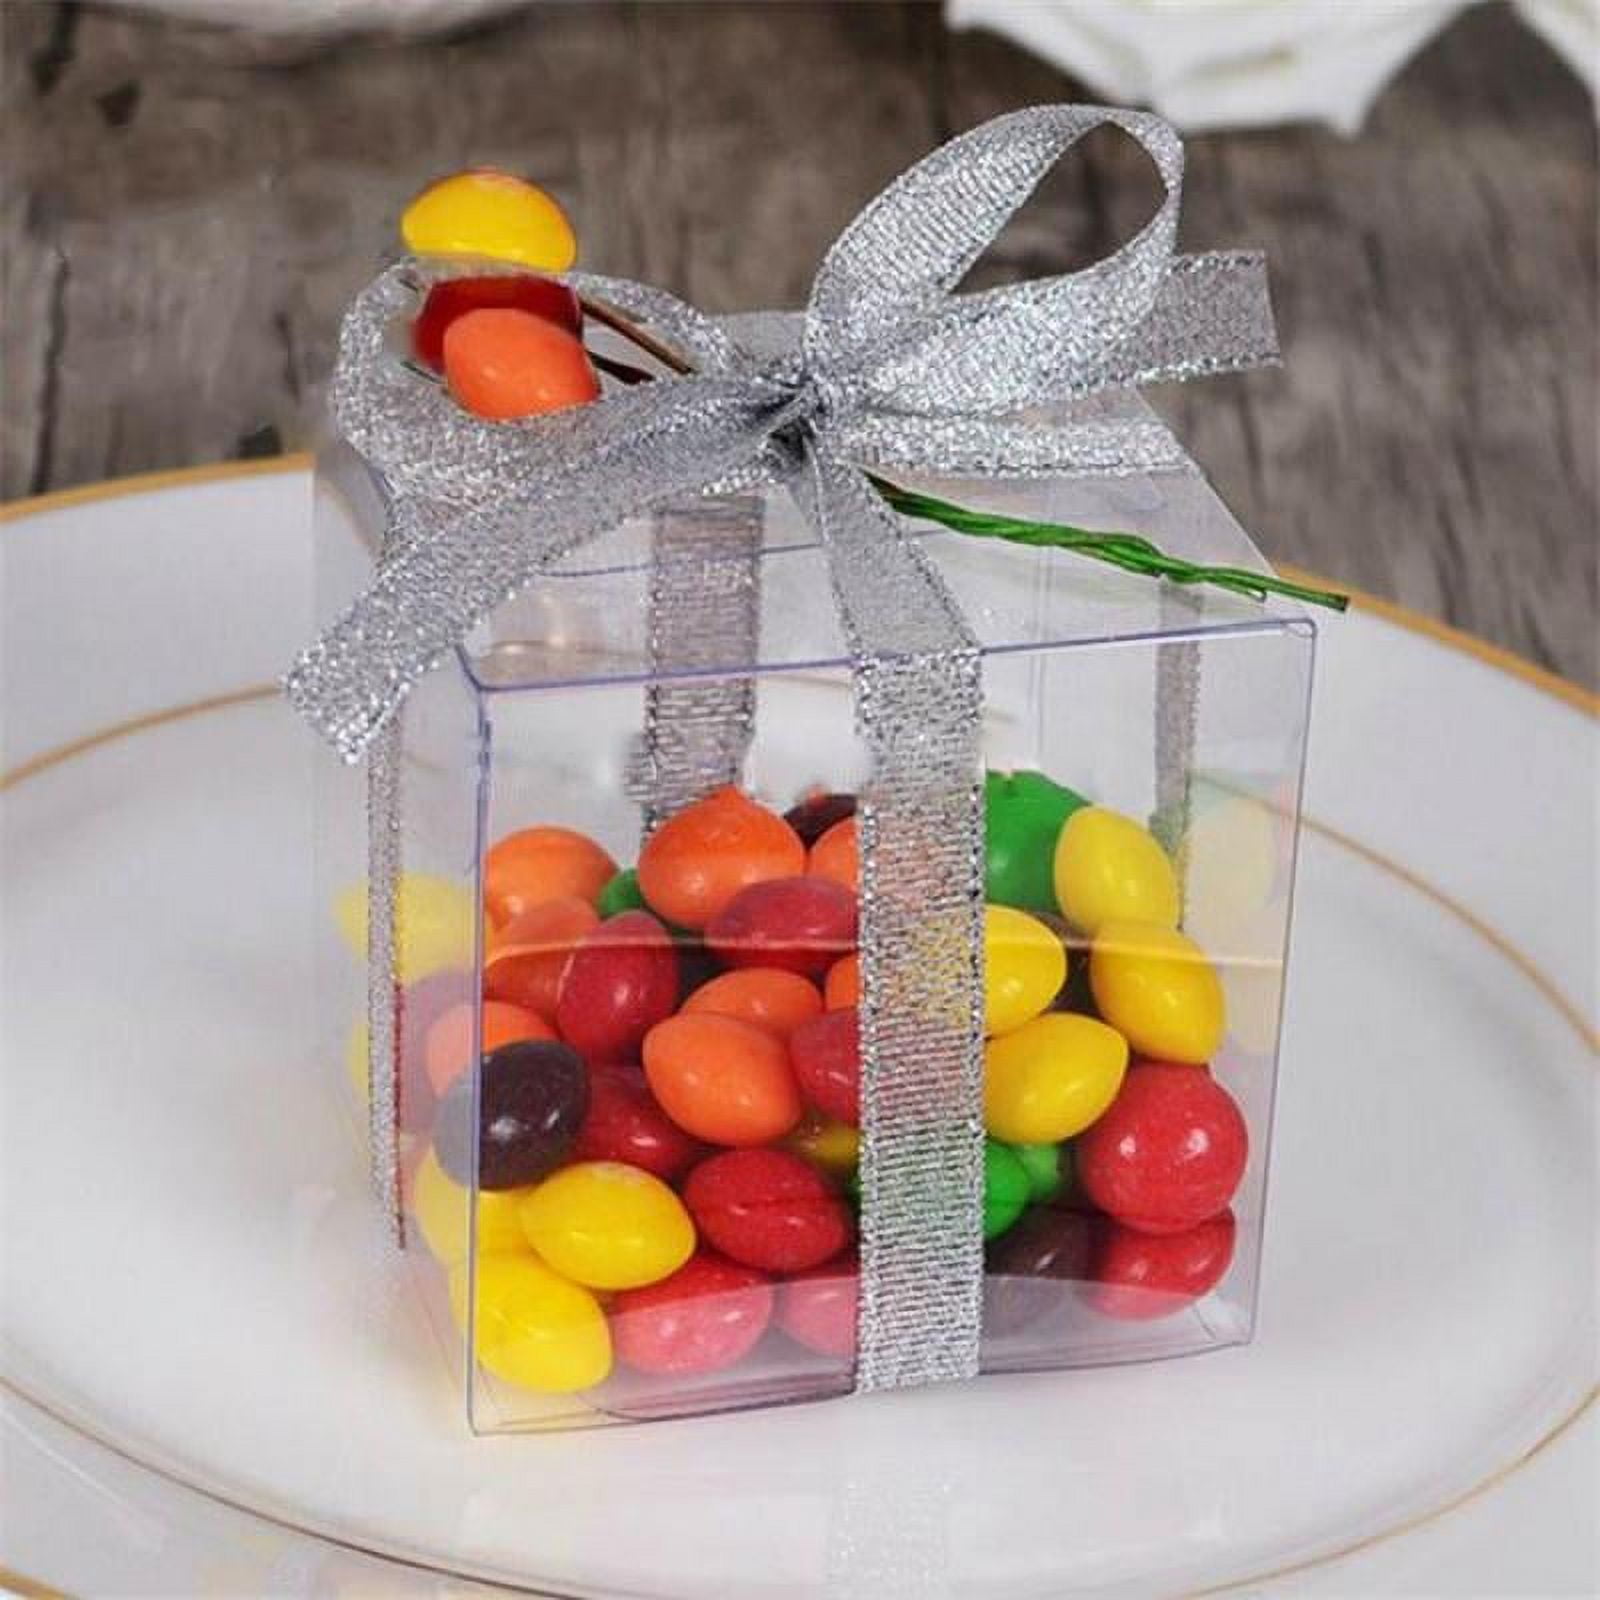 50-Pack 2x2x6 Clear Boxes - Plastic Gift Boxes for Macaron, Candy, Treats,  Wedding, Baby Shower, Birthday Party, Retail